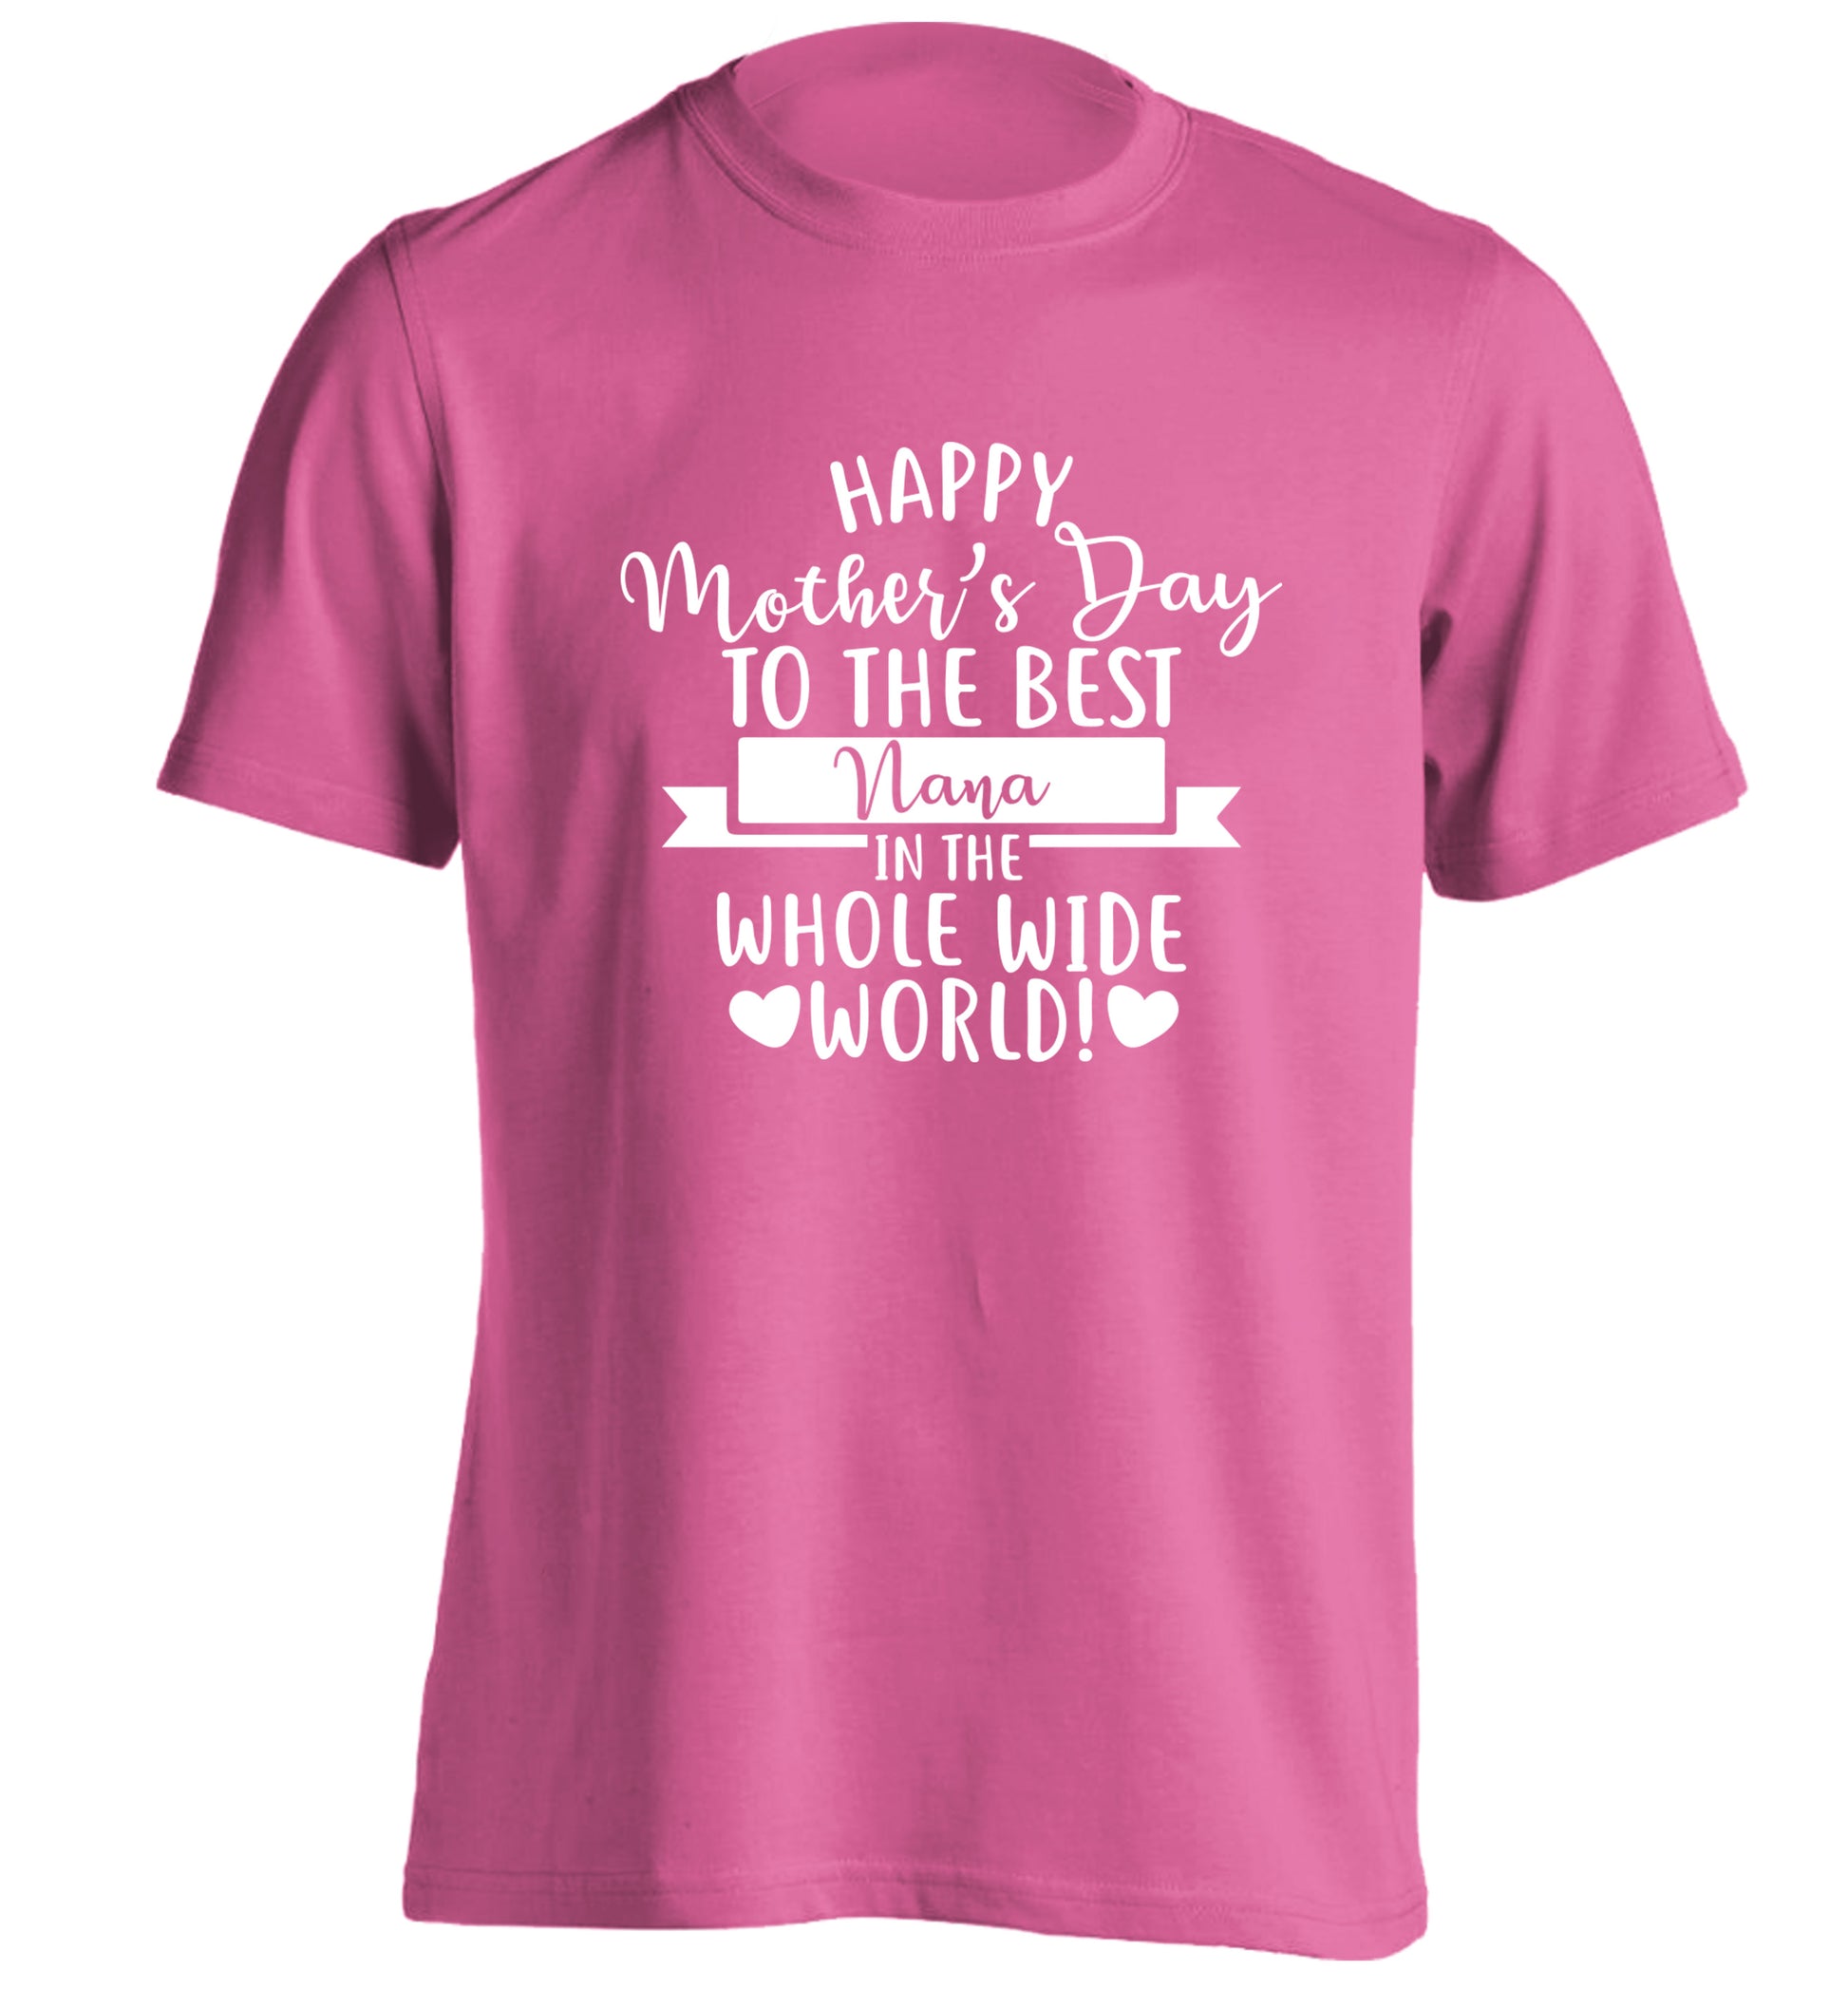 Happy mother's day to the best Nana in the world adults unisex pink Tshirt 2XL